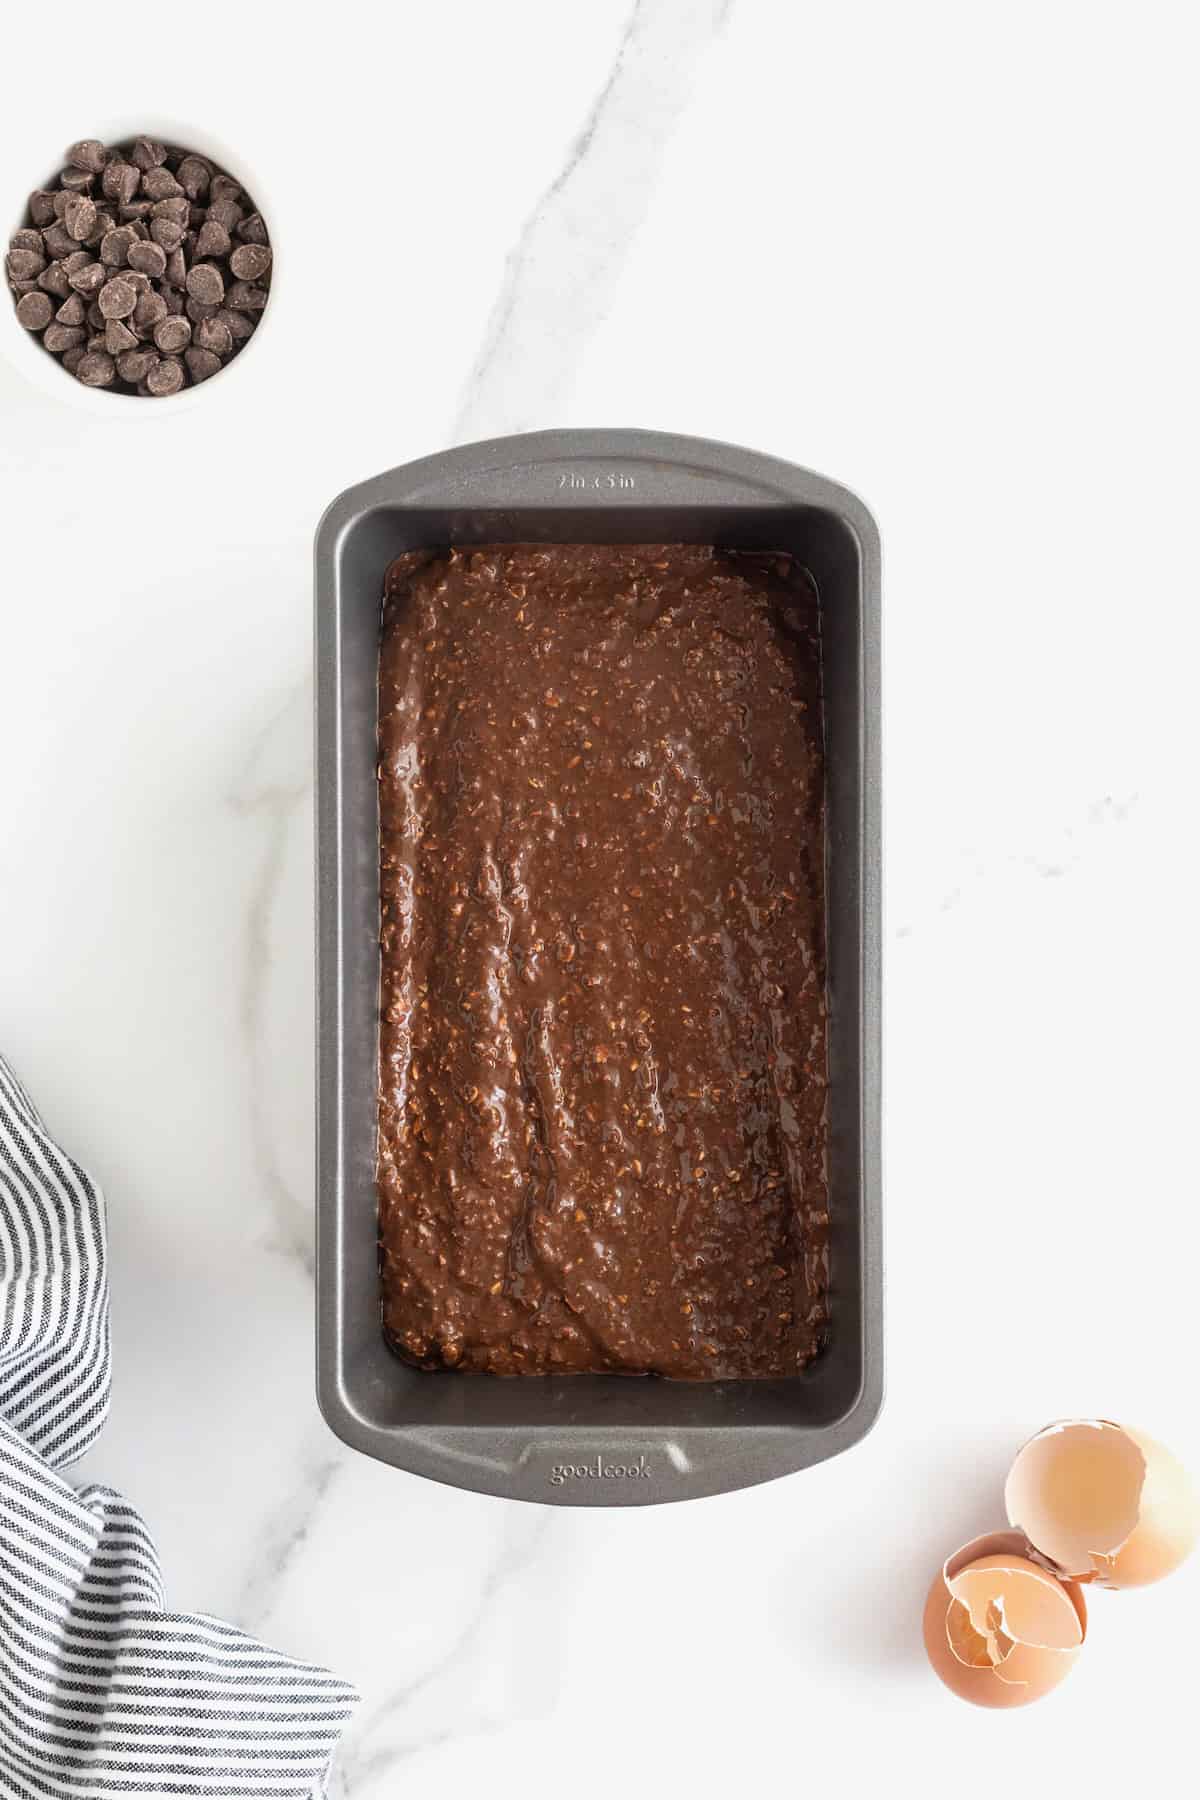 Chocolate banana bread batter in a dark aluminum loaf pan on a white marble counter.